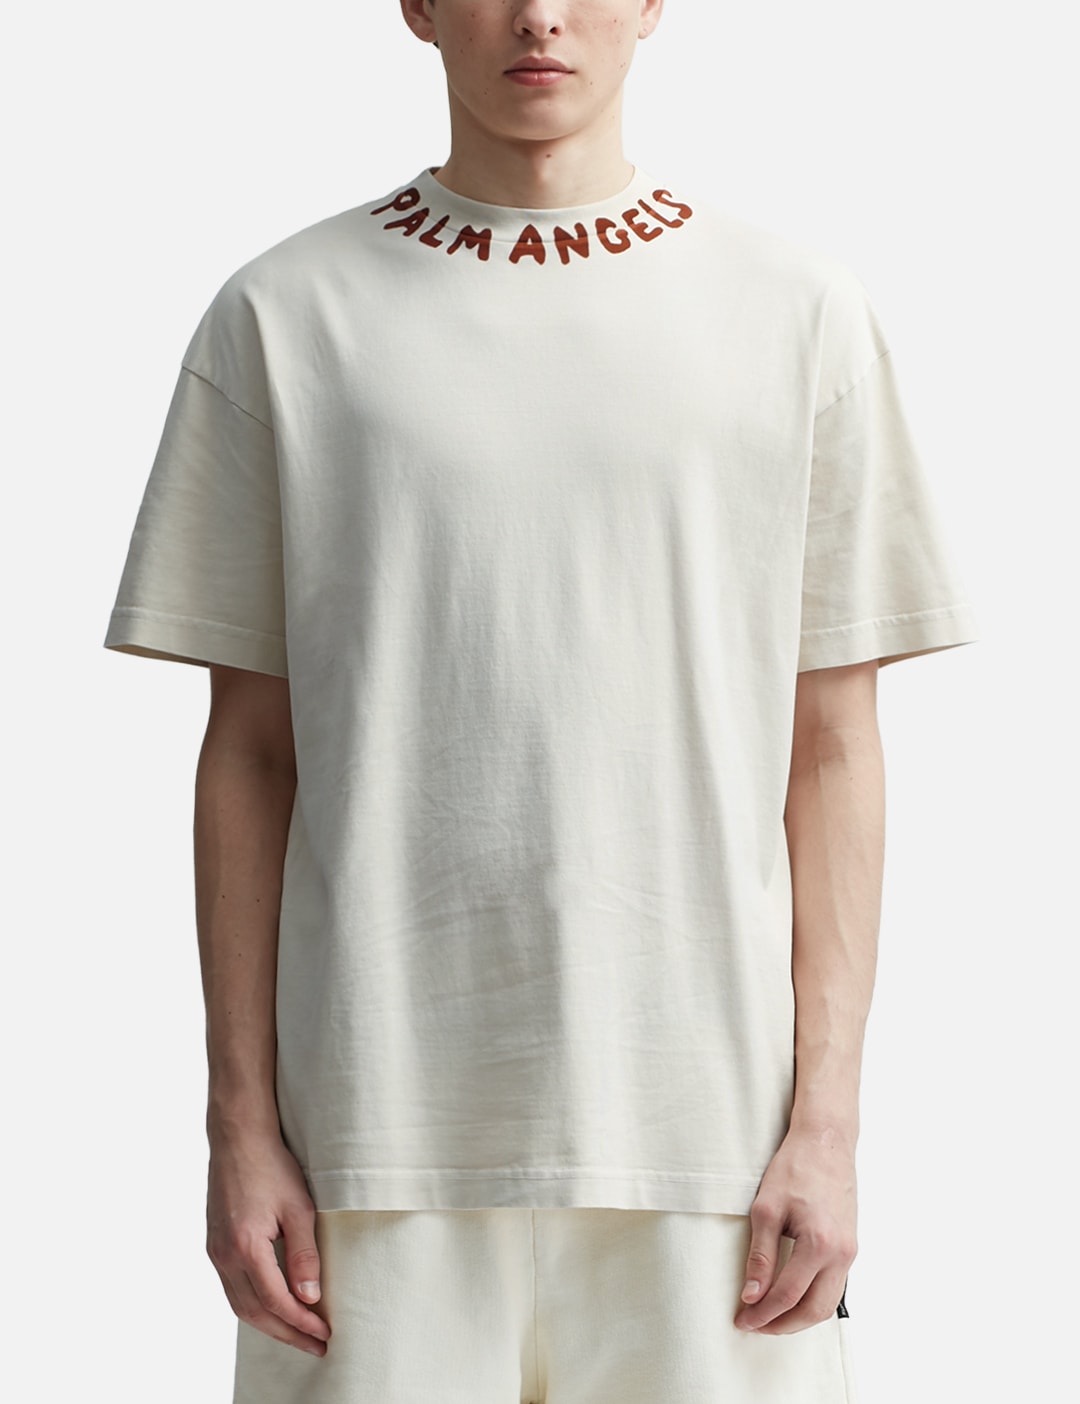 MILANO SPRAYED T-SHIRT on Sale - Palm Angels® Official